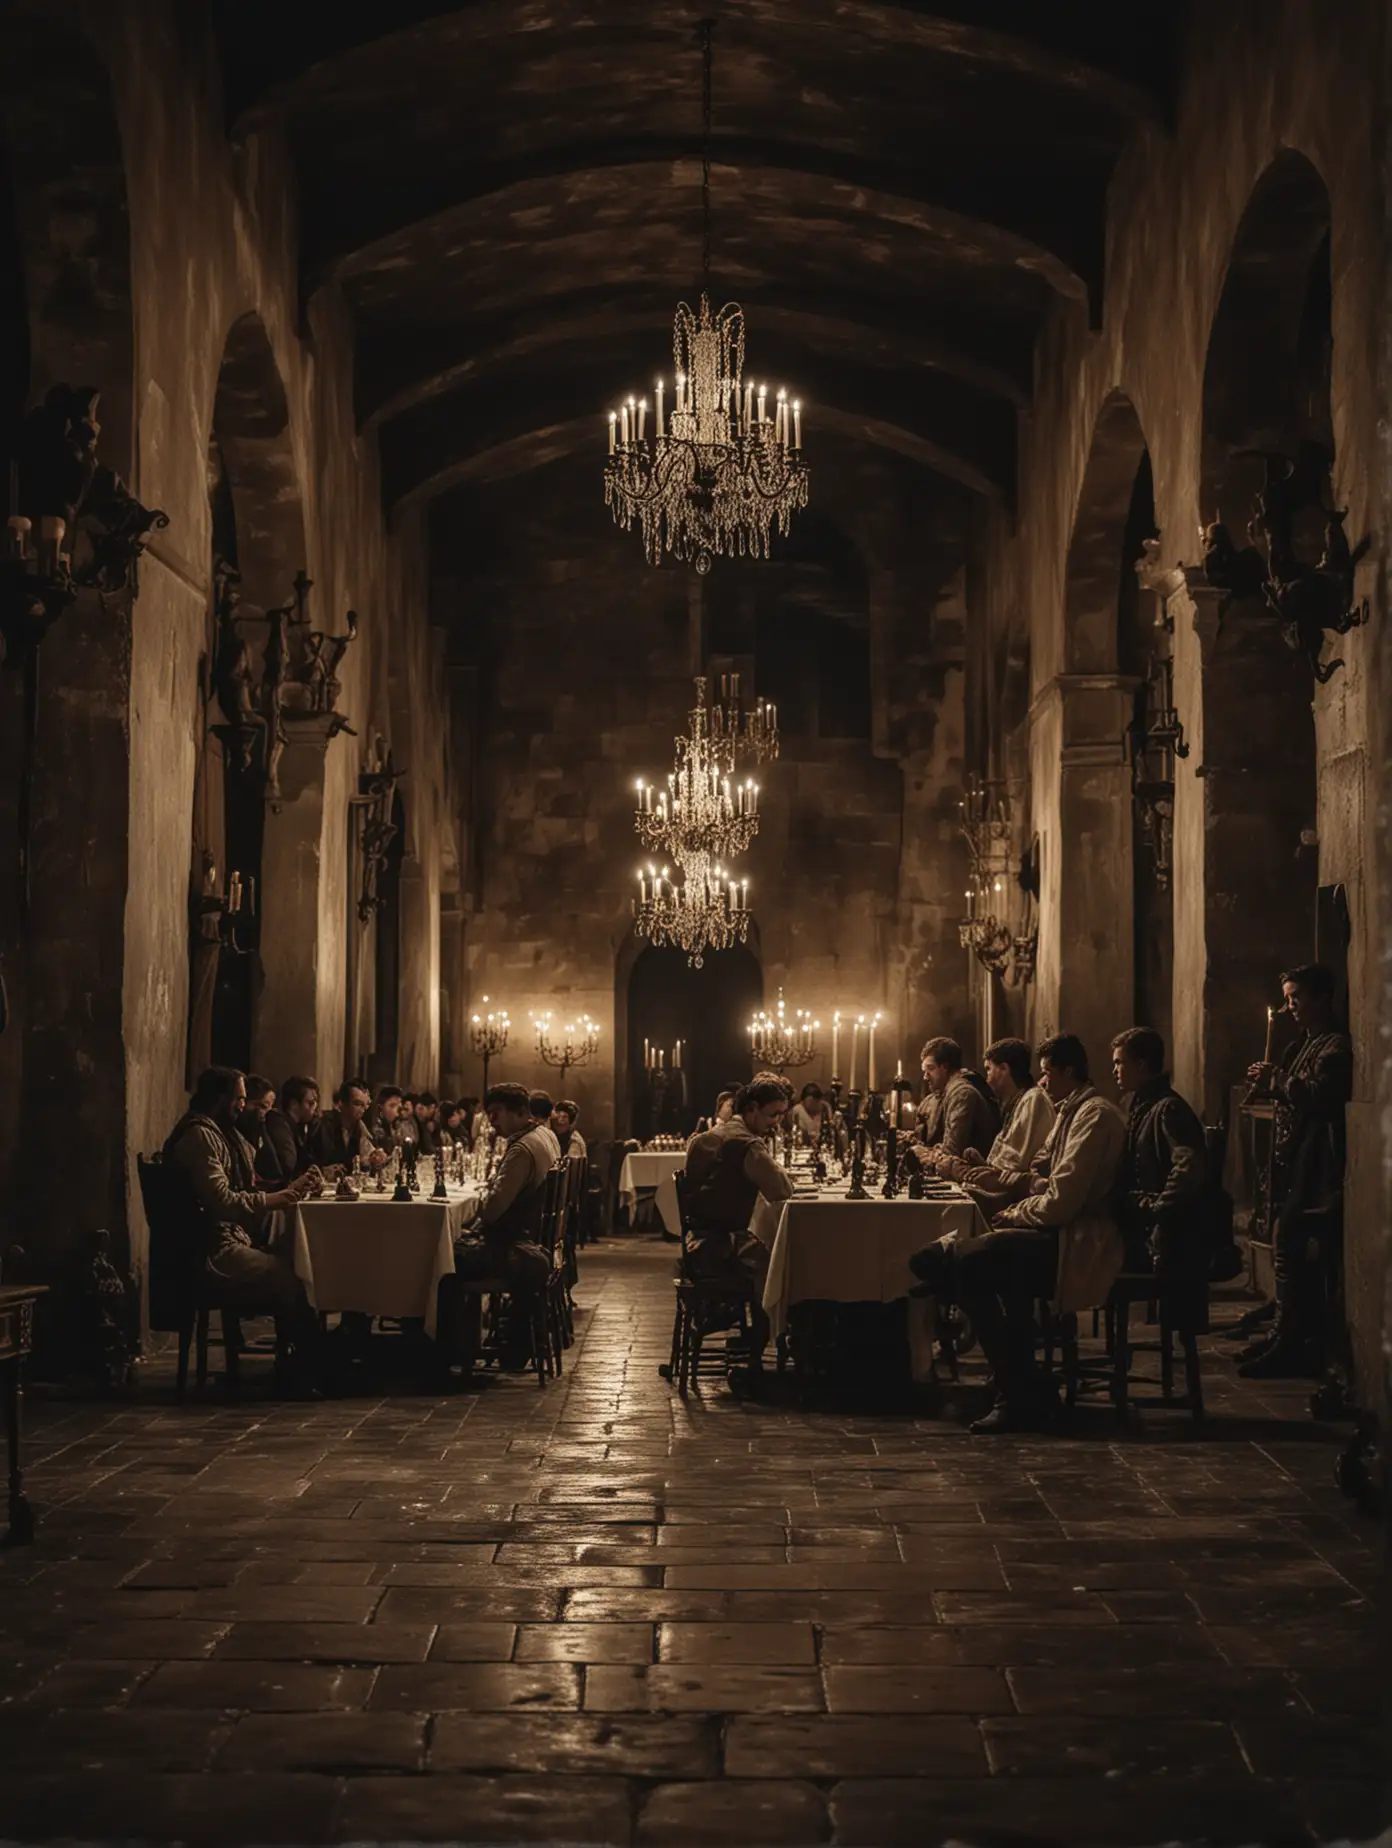 A dim lightened with candlesticks on the walls big hall in a 17th century castle full with young men, dressed with light clothing, boots, sitting at tables and drinking, frozen, surprised and numb watching at the camera, it is dark mysterious and fascinating atmosphere, a shot from the floor